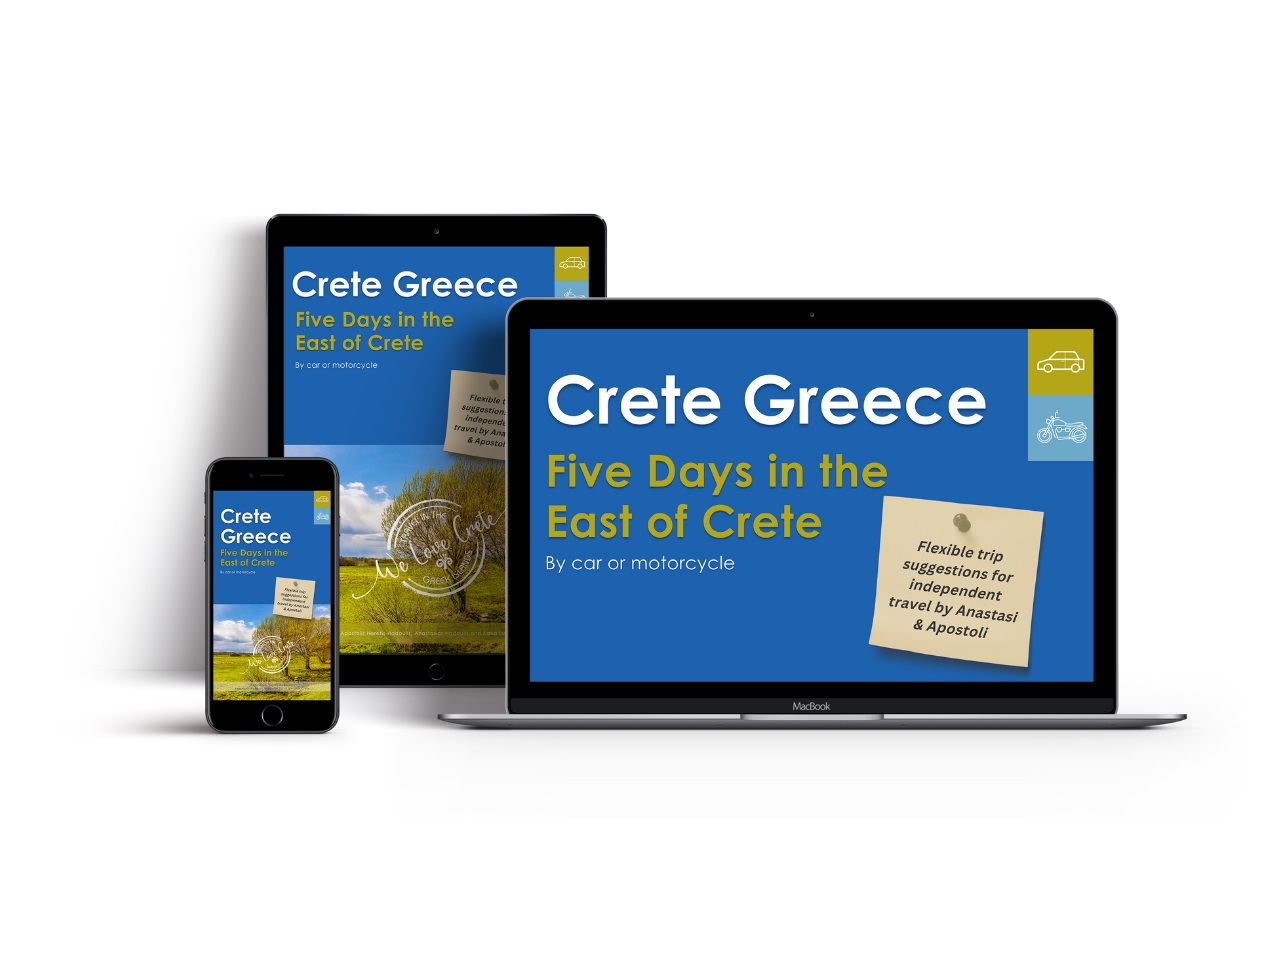 Crete Greece Trip Ideas - 5 Days in the East of Crete by Car or Motorcycle